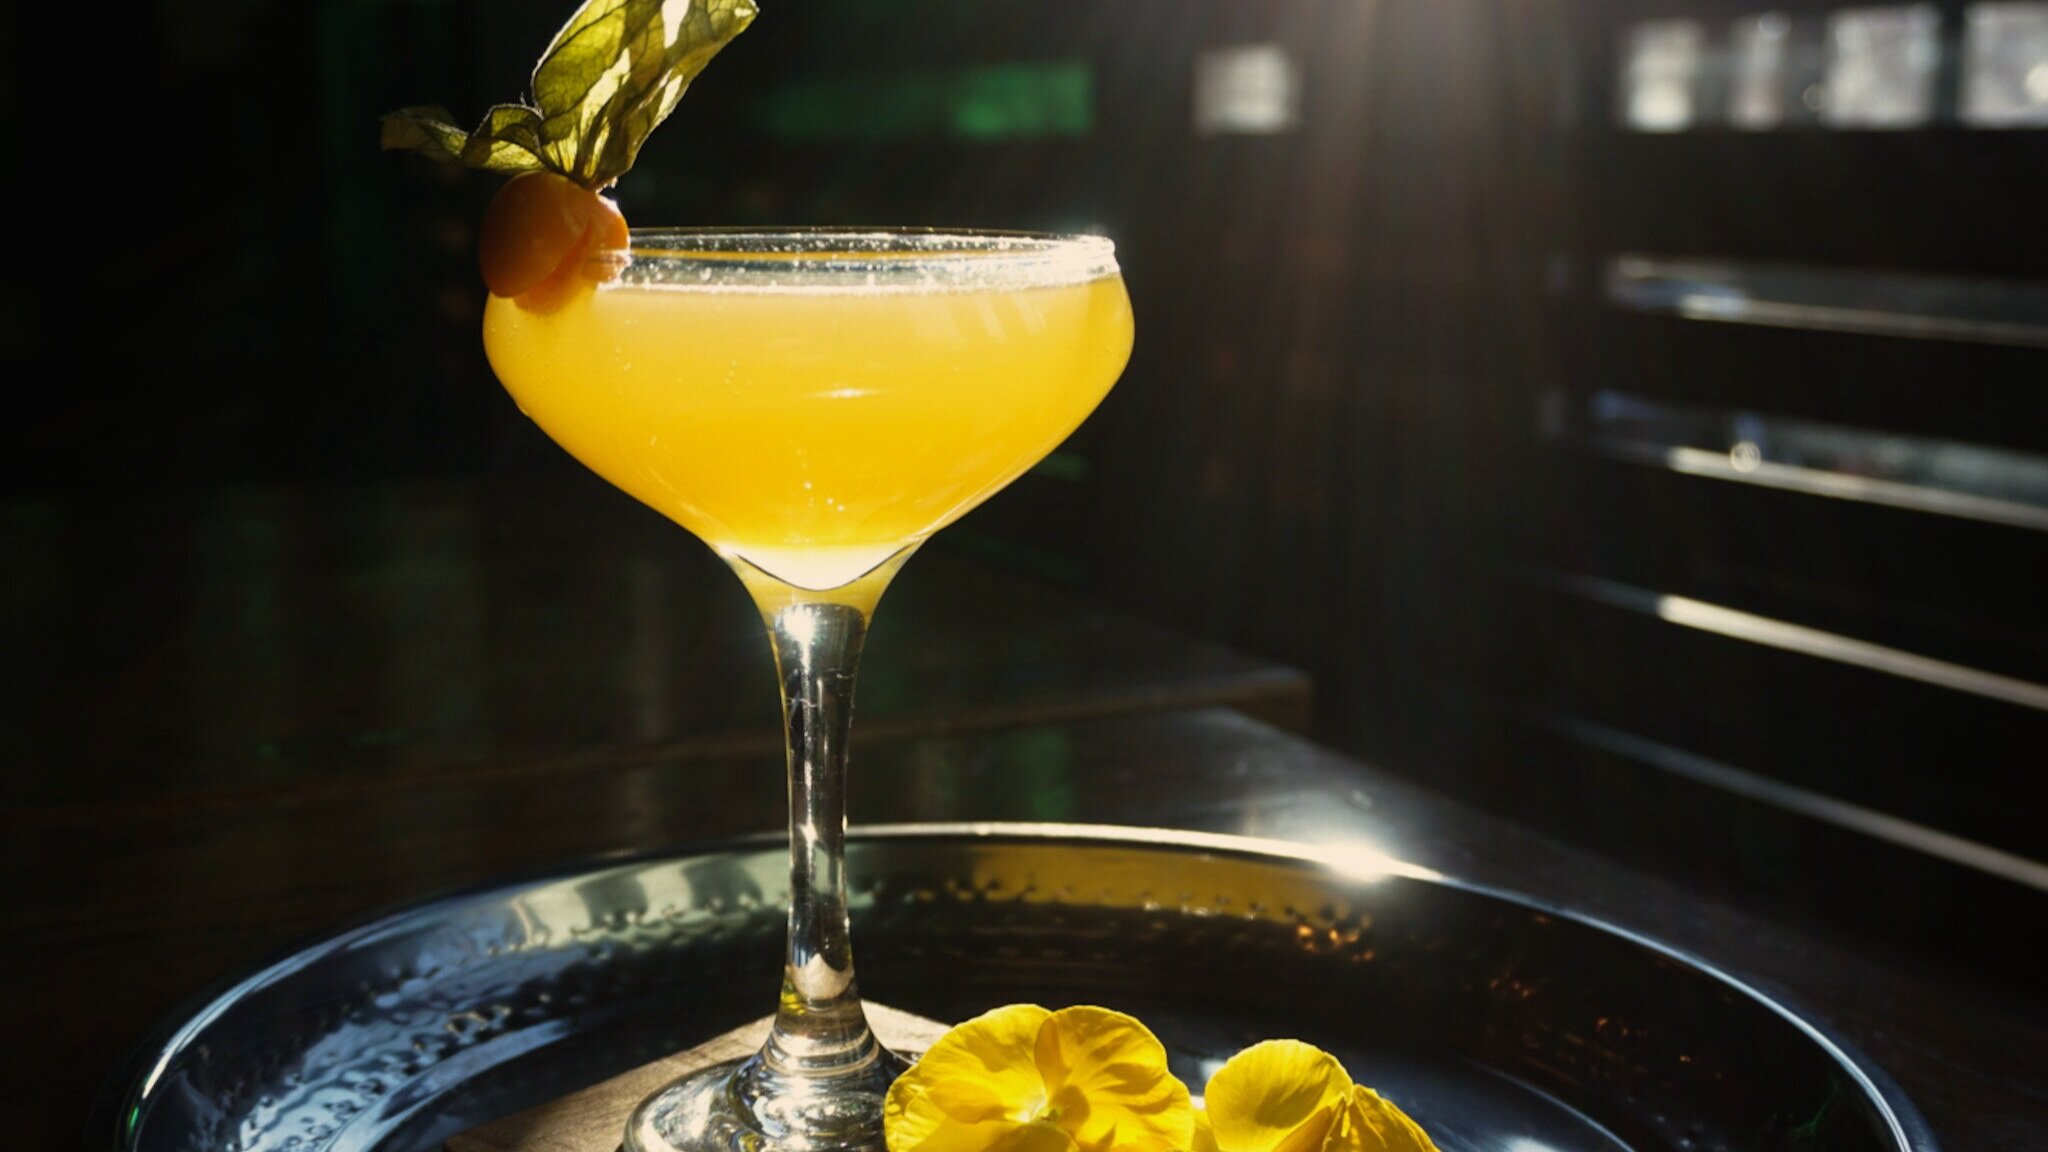  A vibrant yellow cocktail on a tray with a beam of sunlight giving an almost glowing effect. 